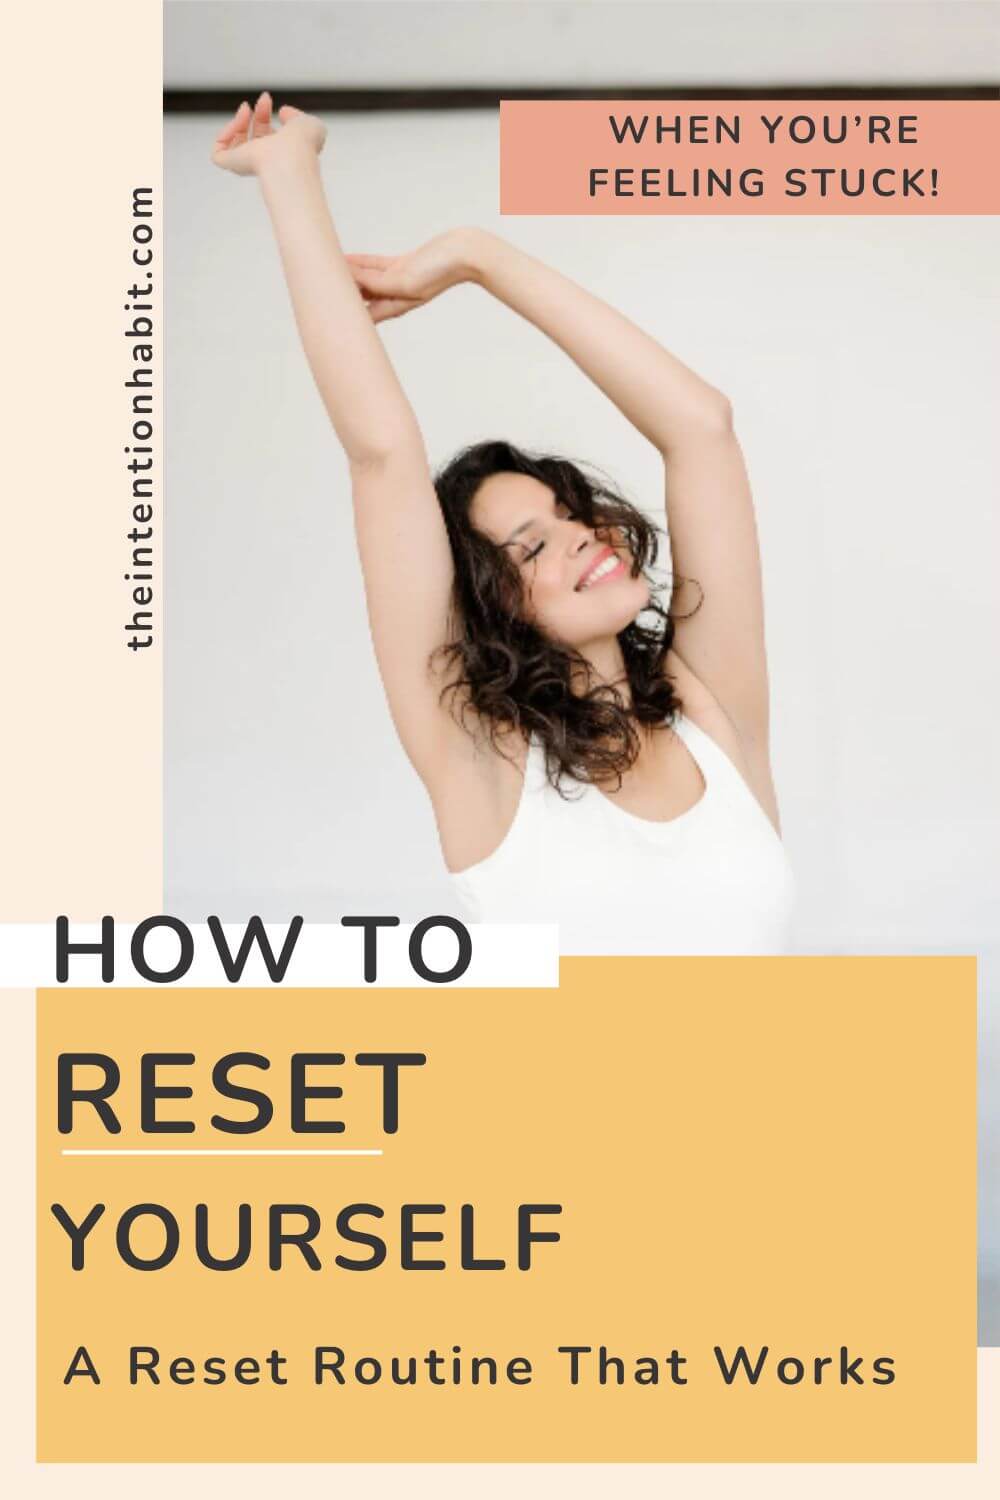 how to reset yourself. A reset routine that works for when you're feeling stuck.